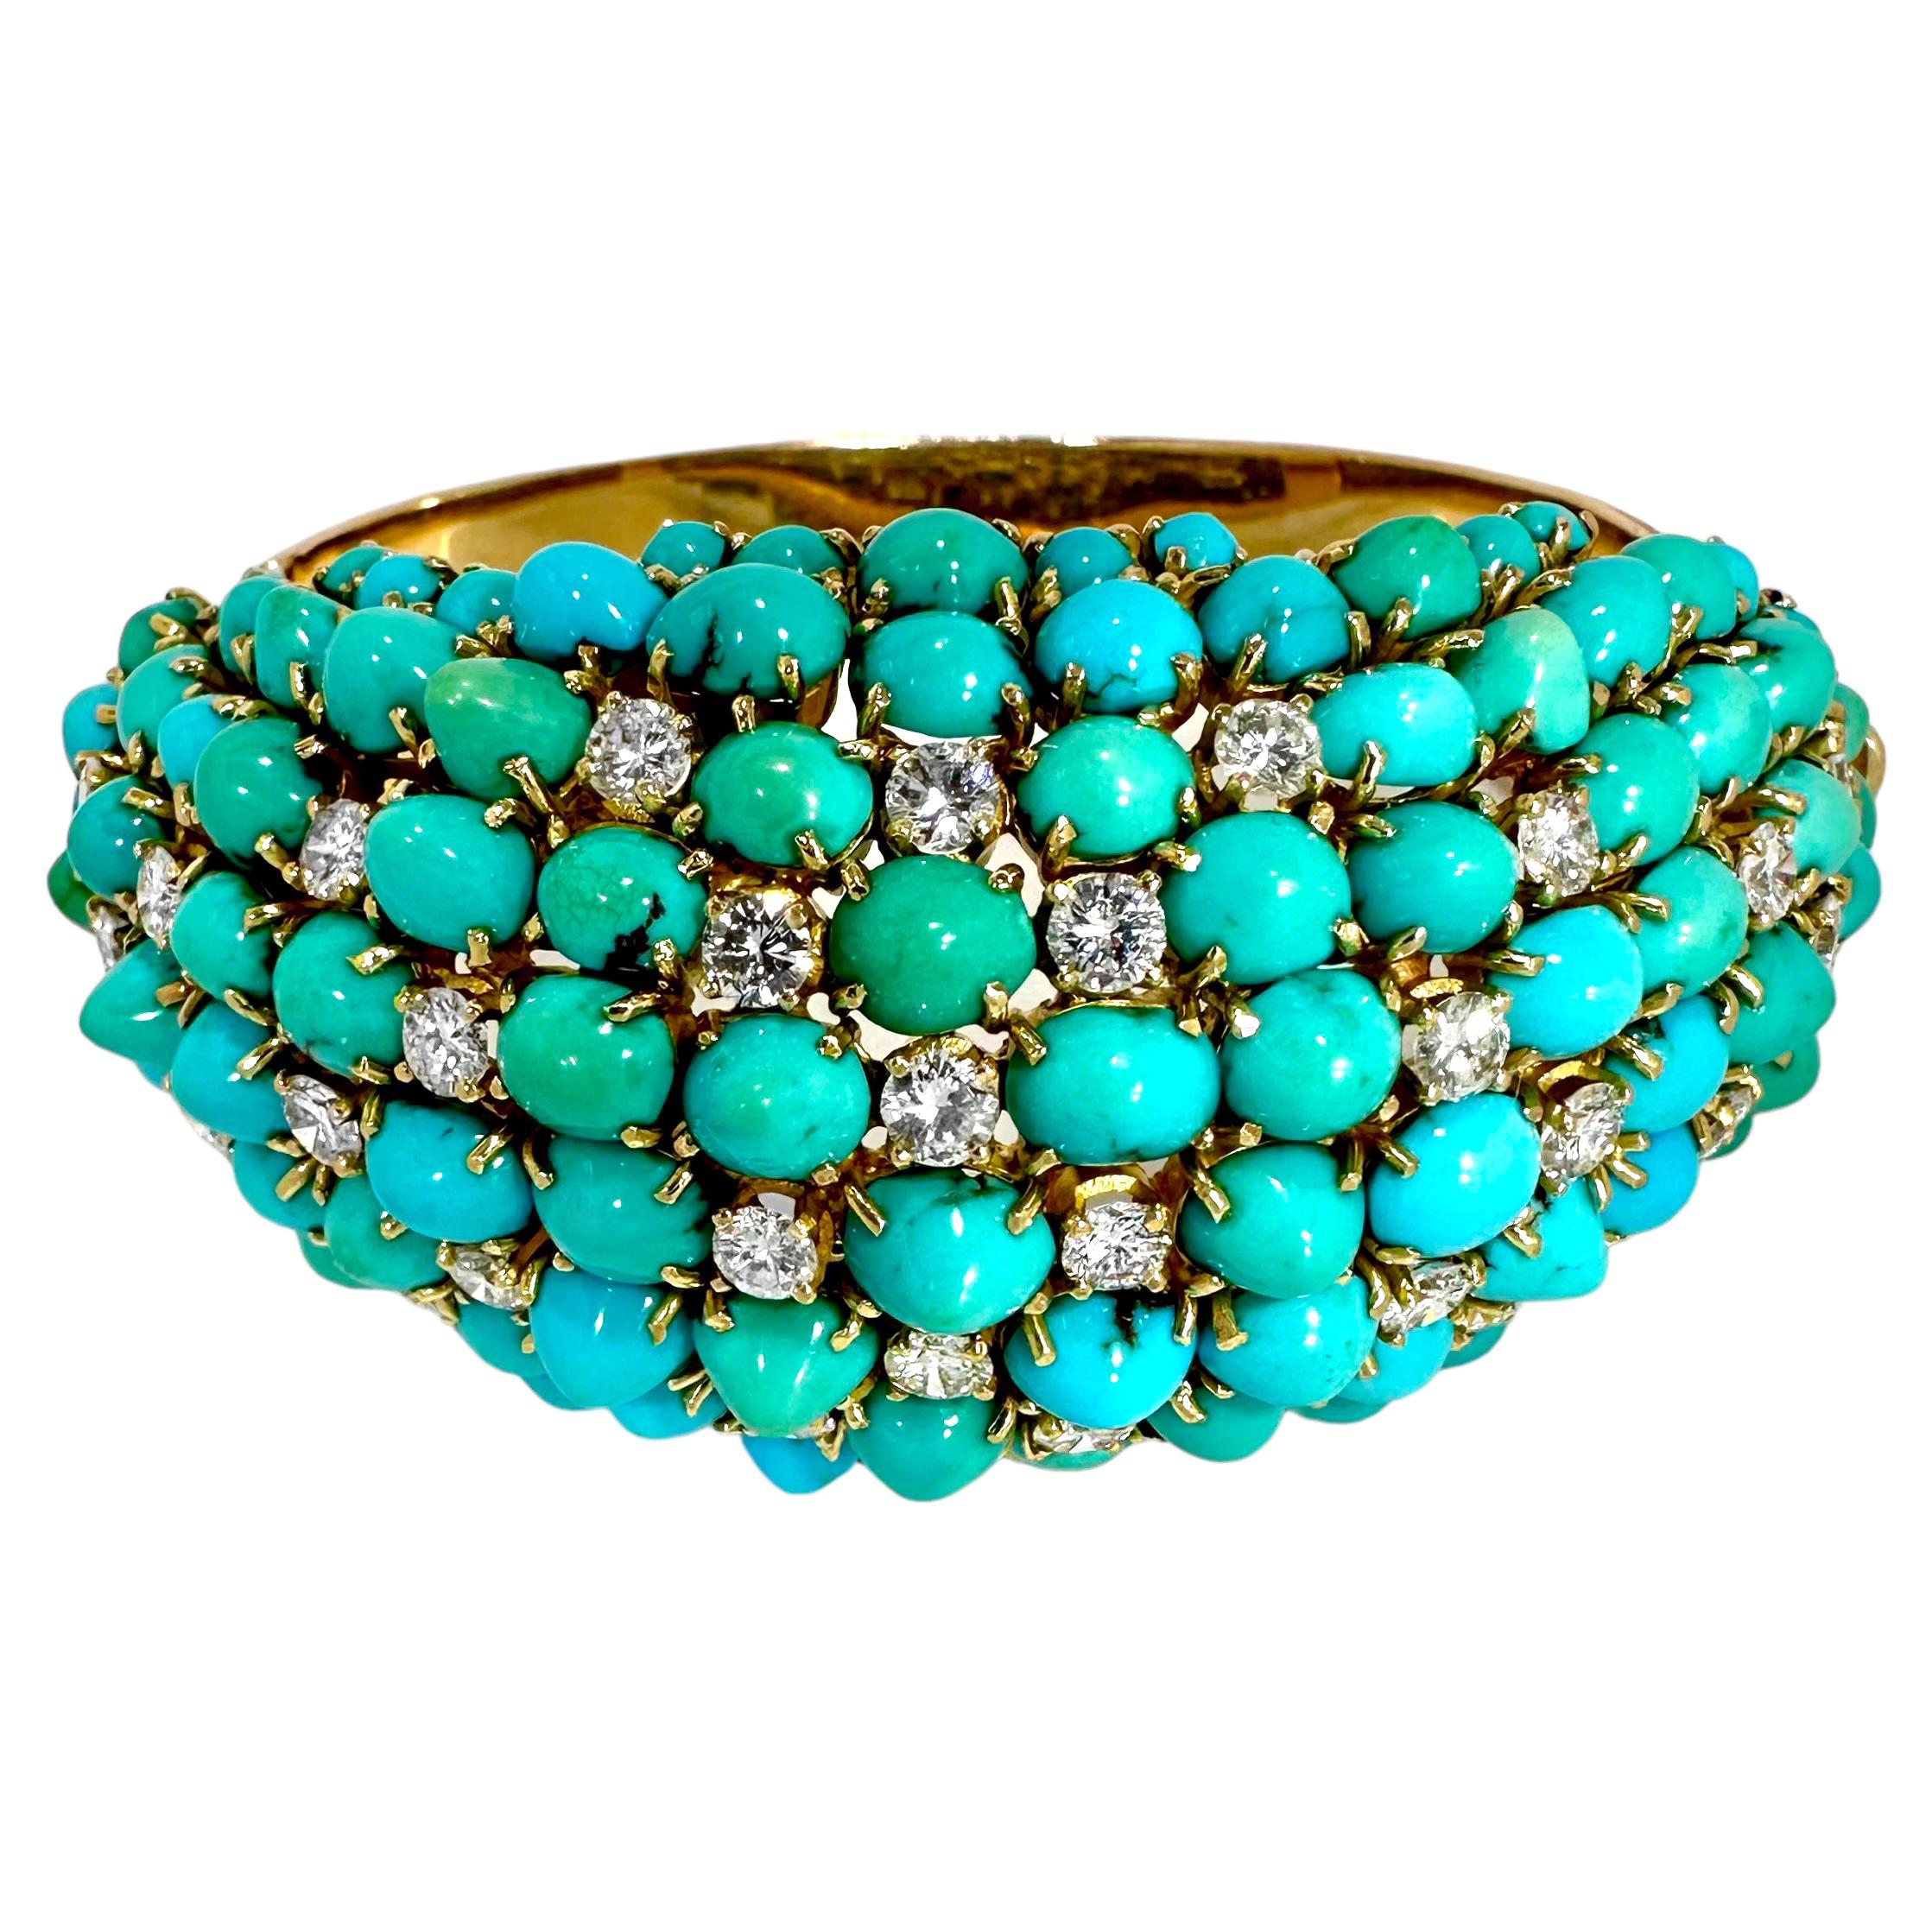 This extraordinary and massive Mid-20th Century, 18k yellow gold, oval shaped bracelet, is generously set with numerous turquoise cabochons in a large and towering bombe dome. Thirty four brilliant cut diamonds are set at various intervals within